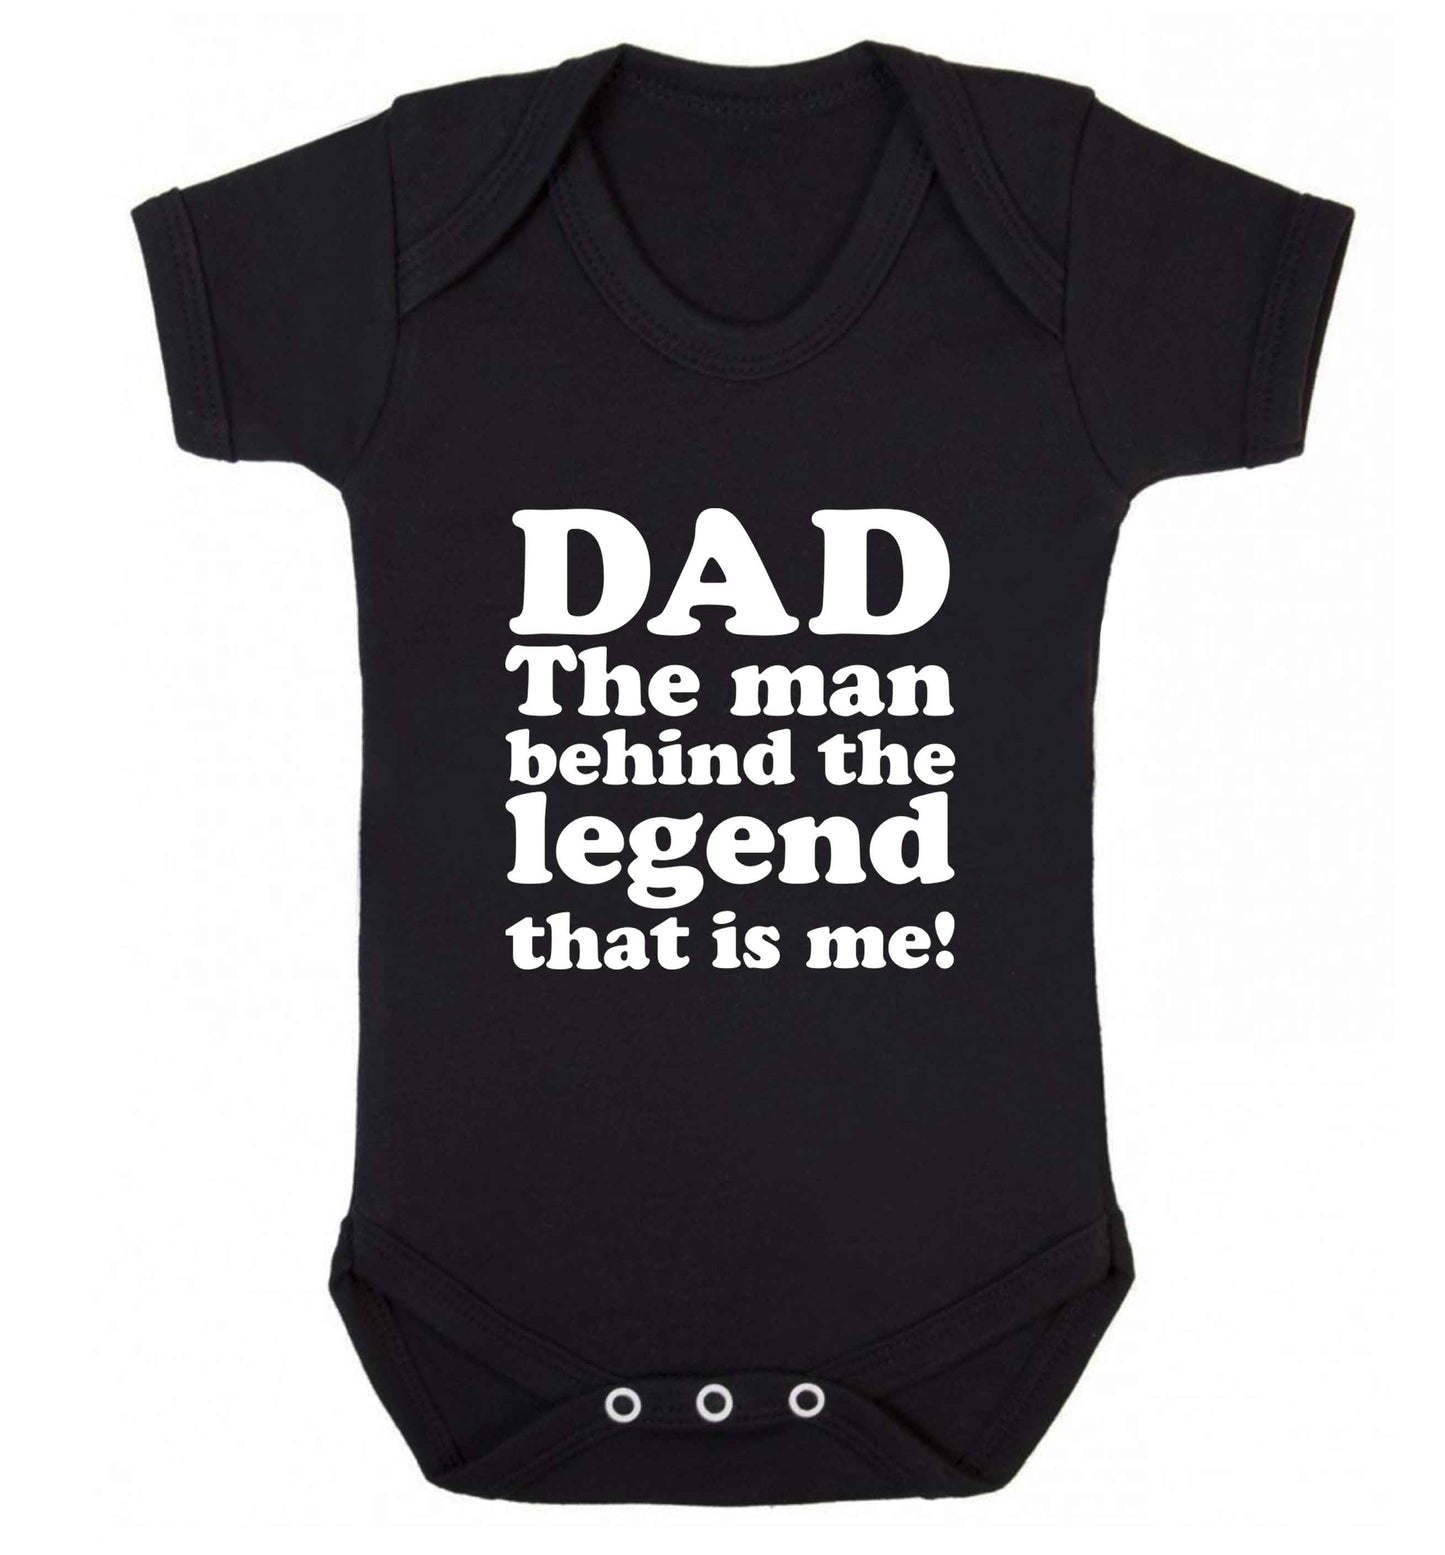 Dad the man behind the legend that is me baby vest black 18-24 months